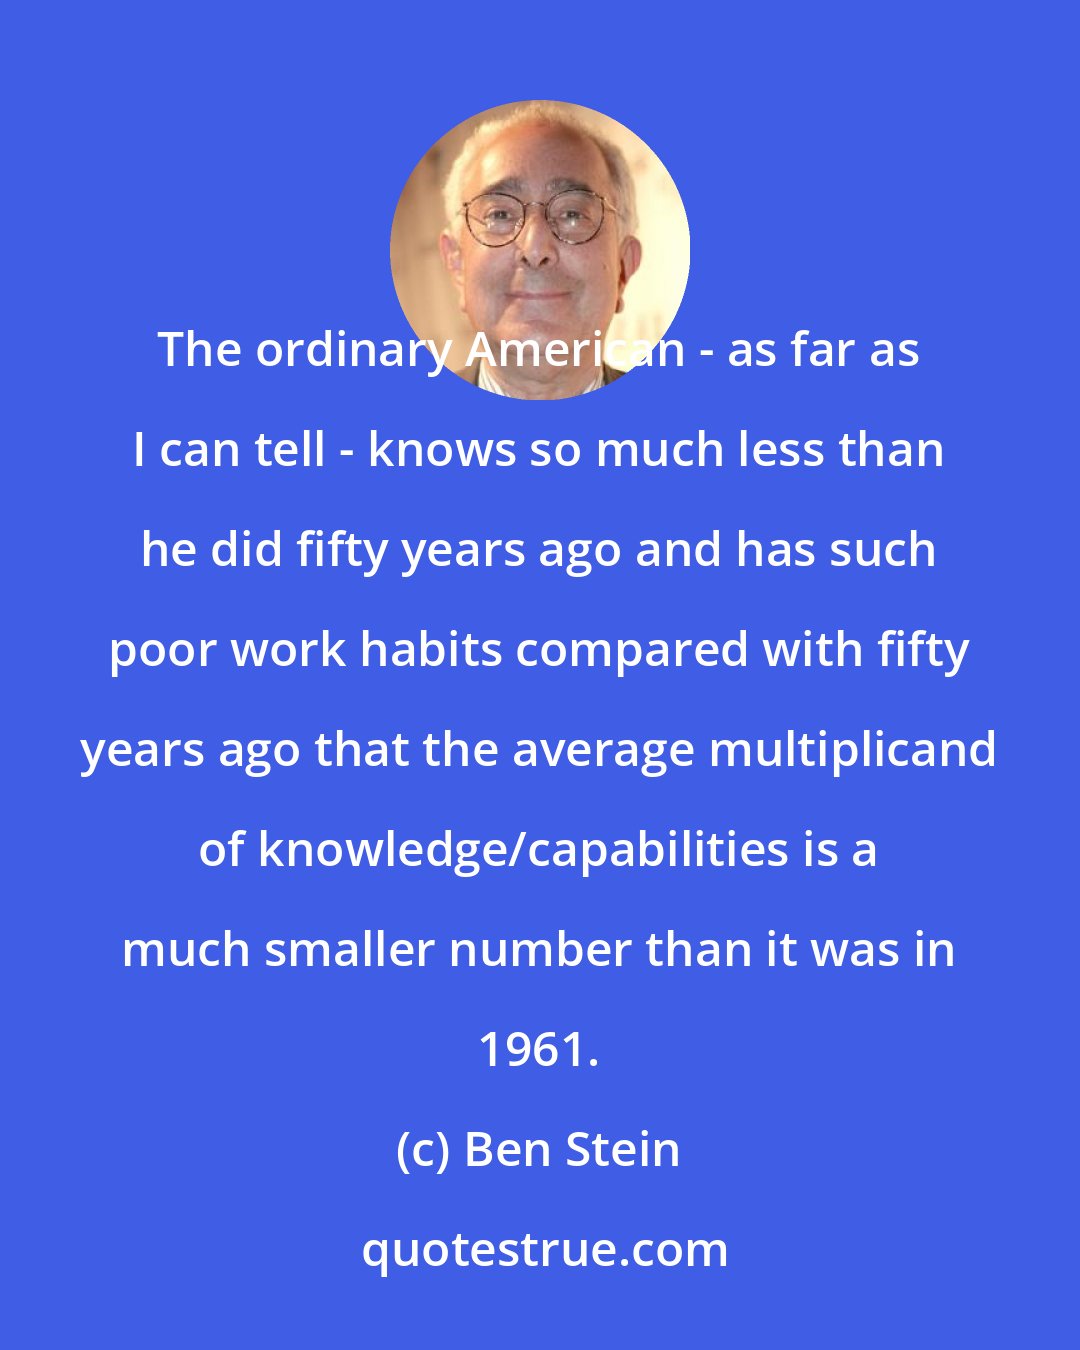 Ben Stein: The ordinary American - as far as I can tell - knows so much less than he did fifty years ago and has such poor work habits compared with fifty years ago that the average multiplicand of knowledge/capabilities is a much smaller number than it was in 1961.